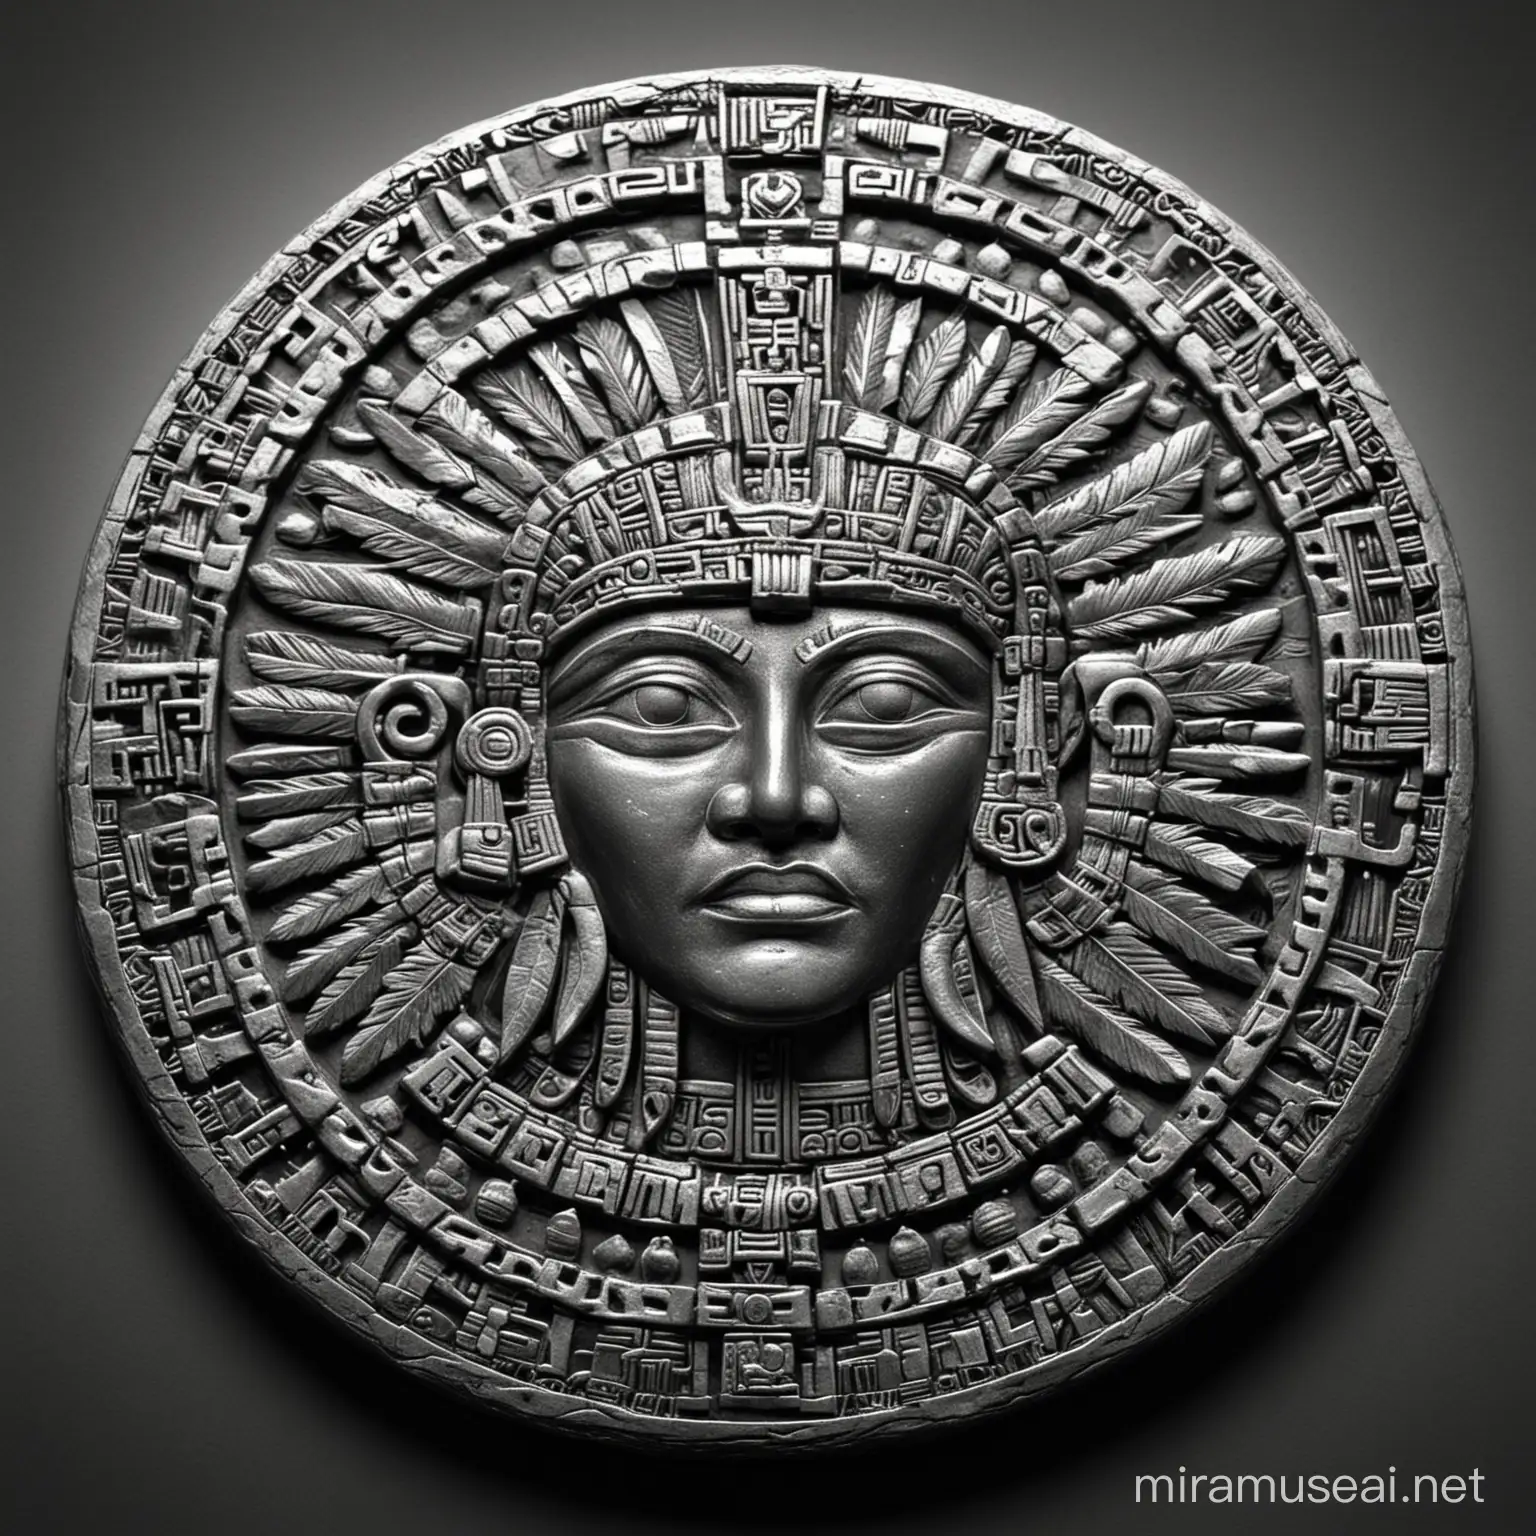 Aztec Motif Silver Coin in High Relief Black and White Numismatic Artwork